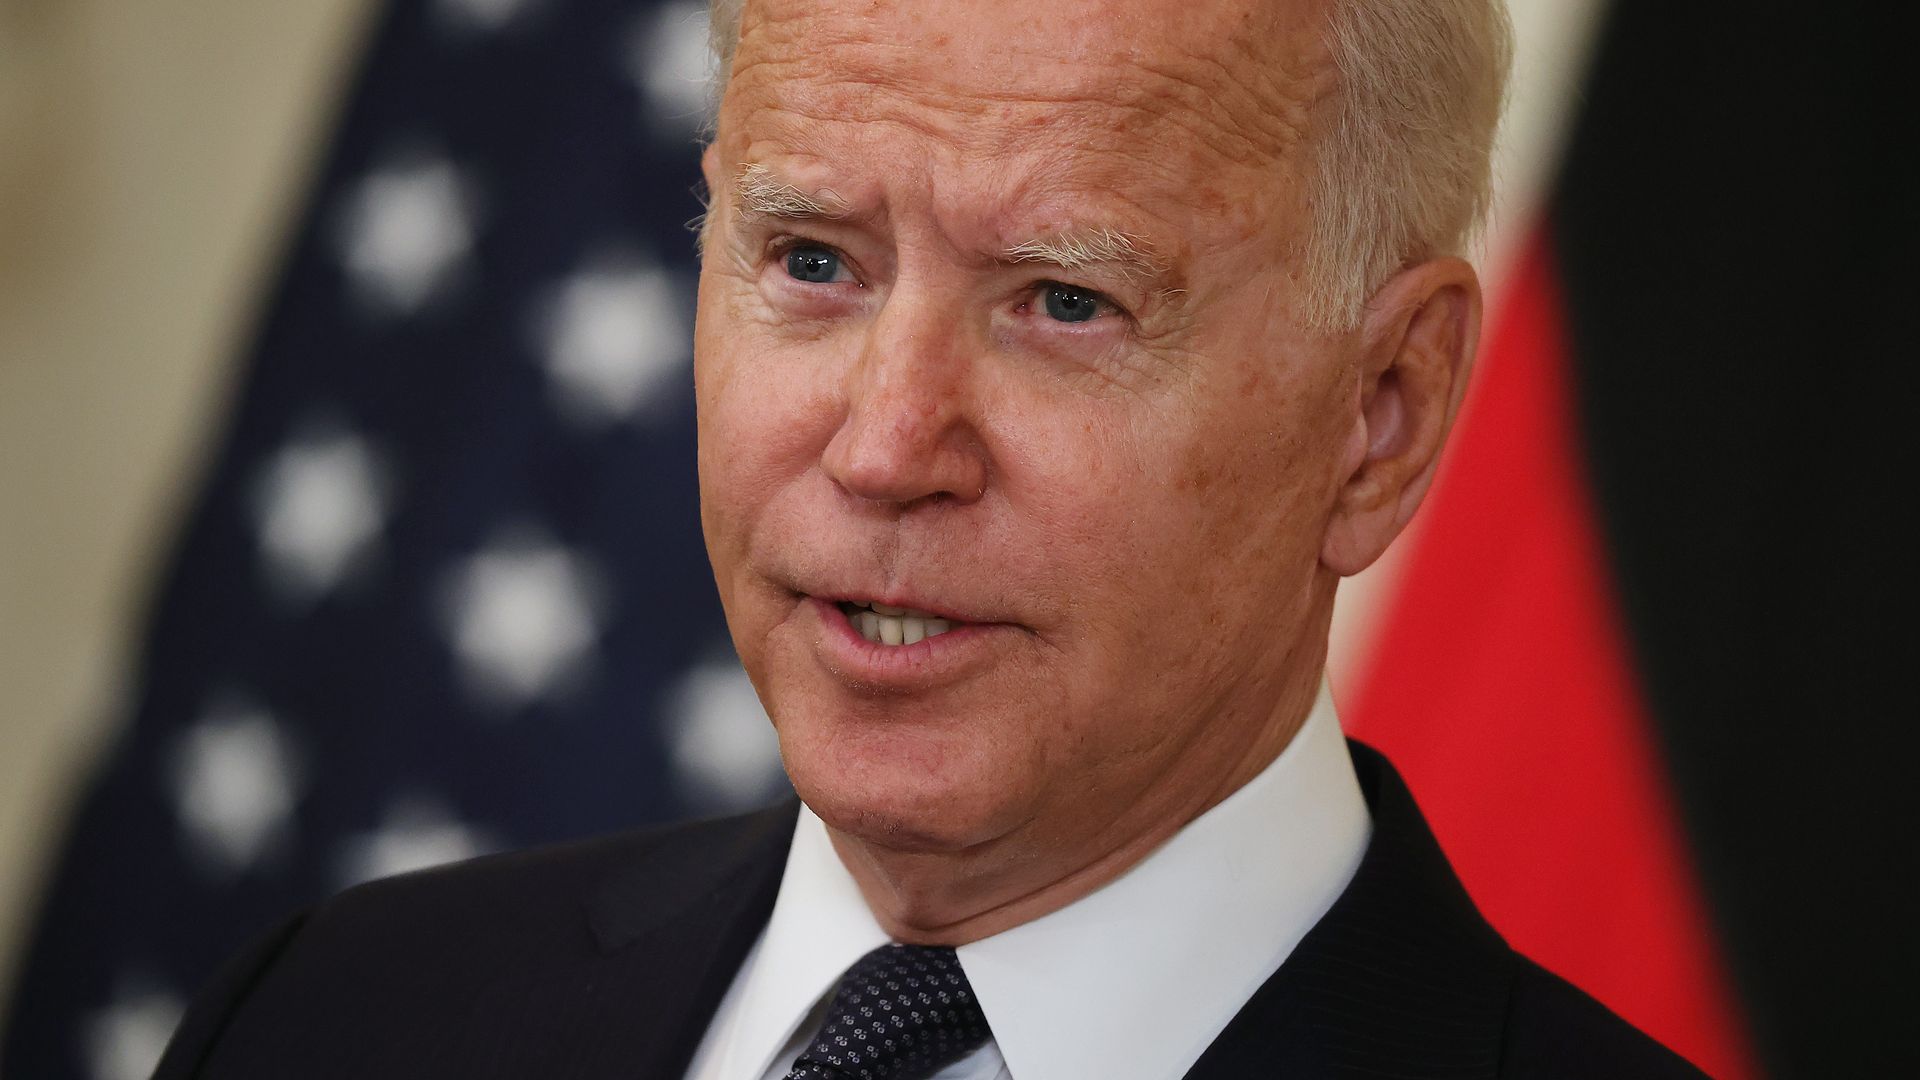 President Biden during a news conference in the White House on July 15.